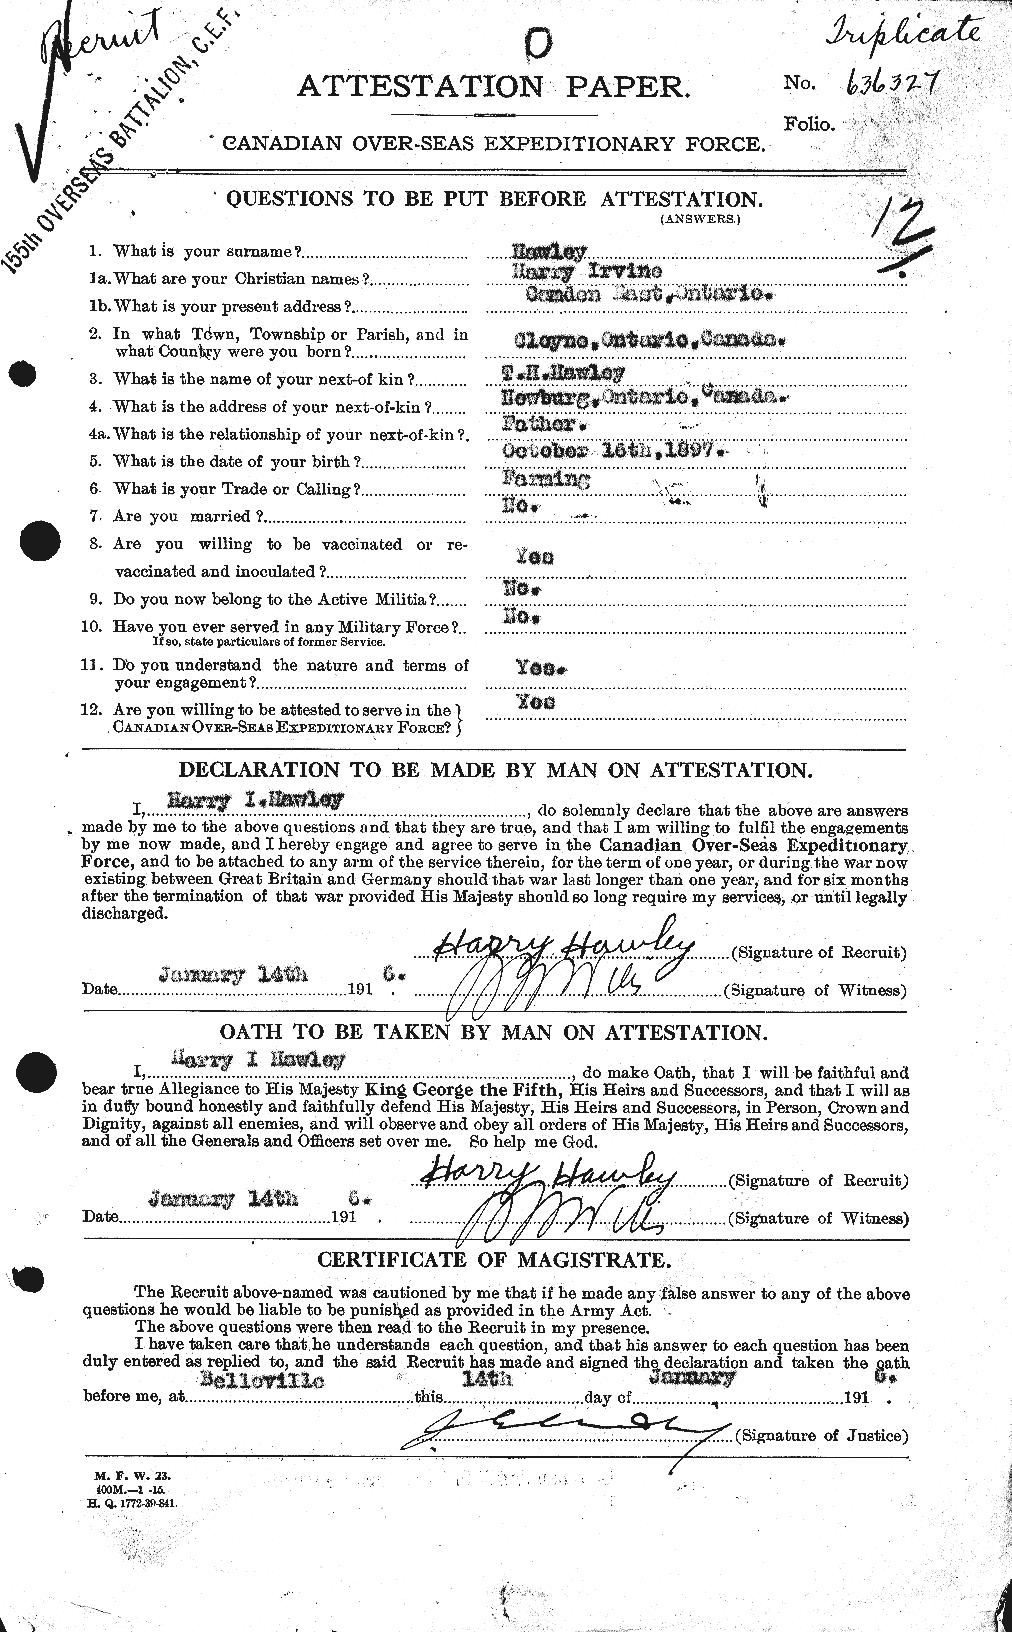 Personnel Records of the First World War - CEF 387826a